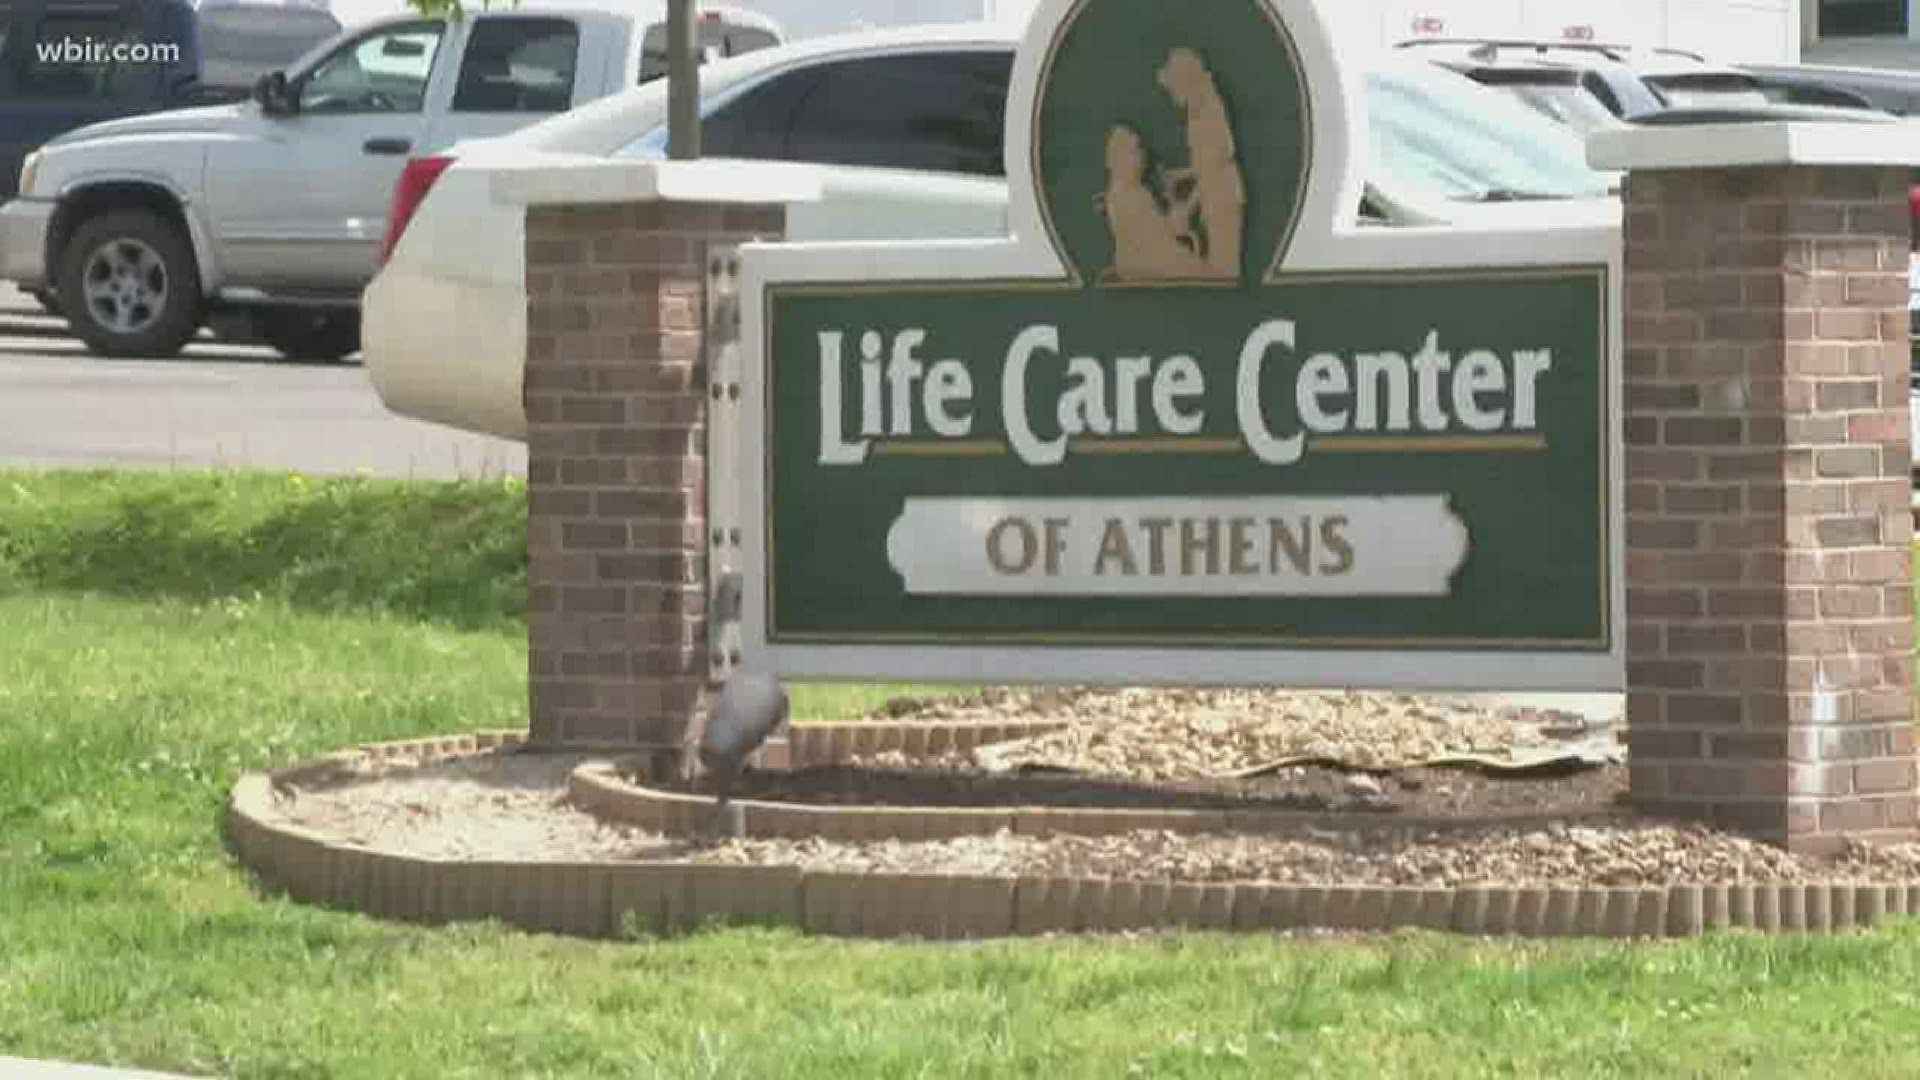 At one nursing home in Athens, 54 residents have tested positive for coronavirus.